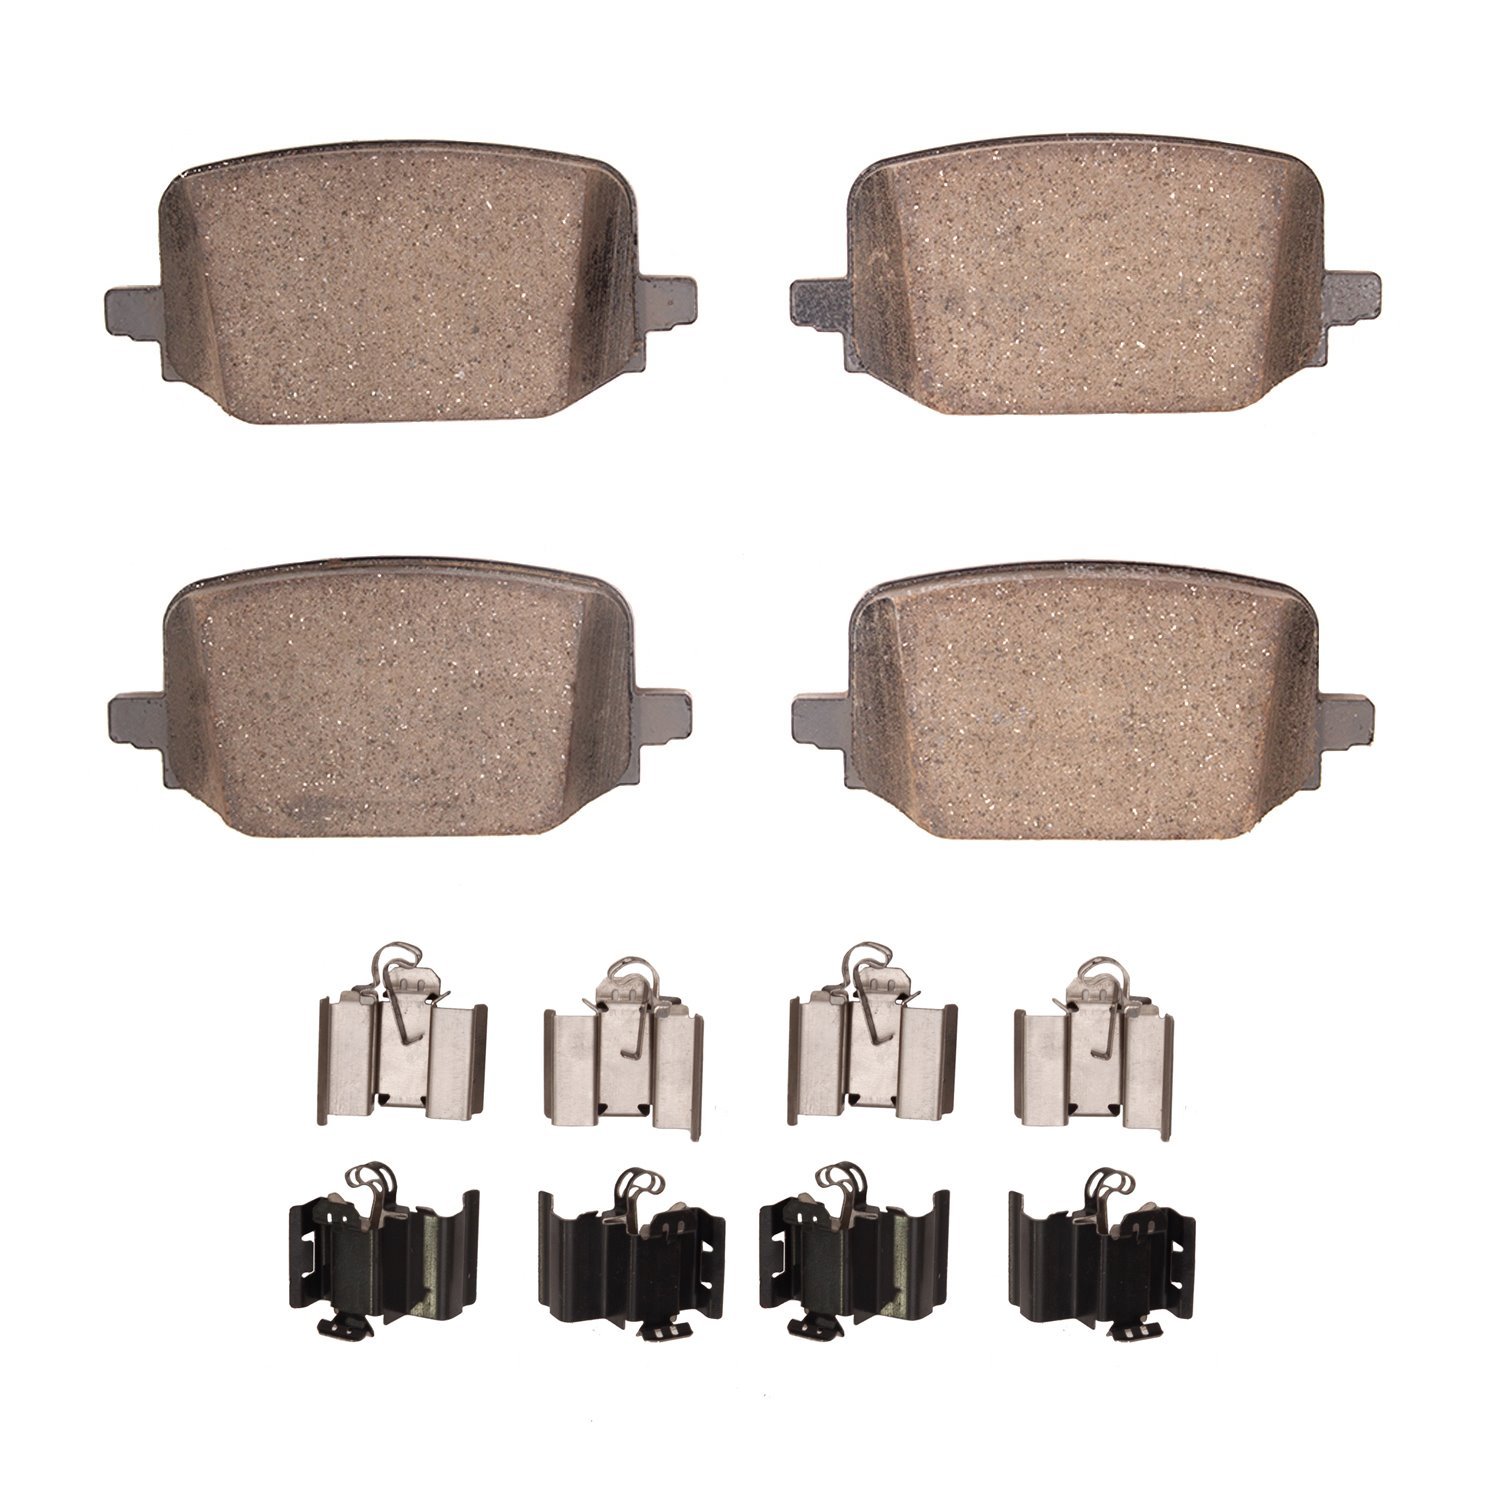 1310-2232-01 3000-Series Ceramic Brake Pads & Hardware Kit, Fits Select Ford/Lincoln/Mercury/Mazda, Position: Rear